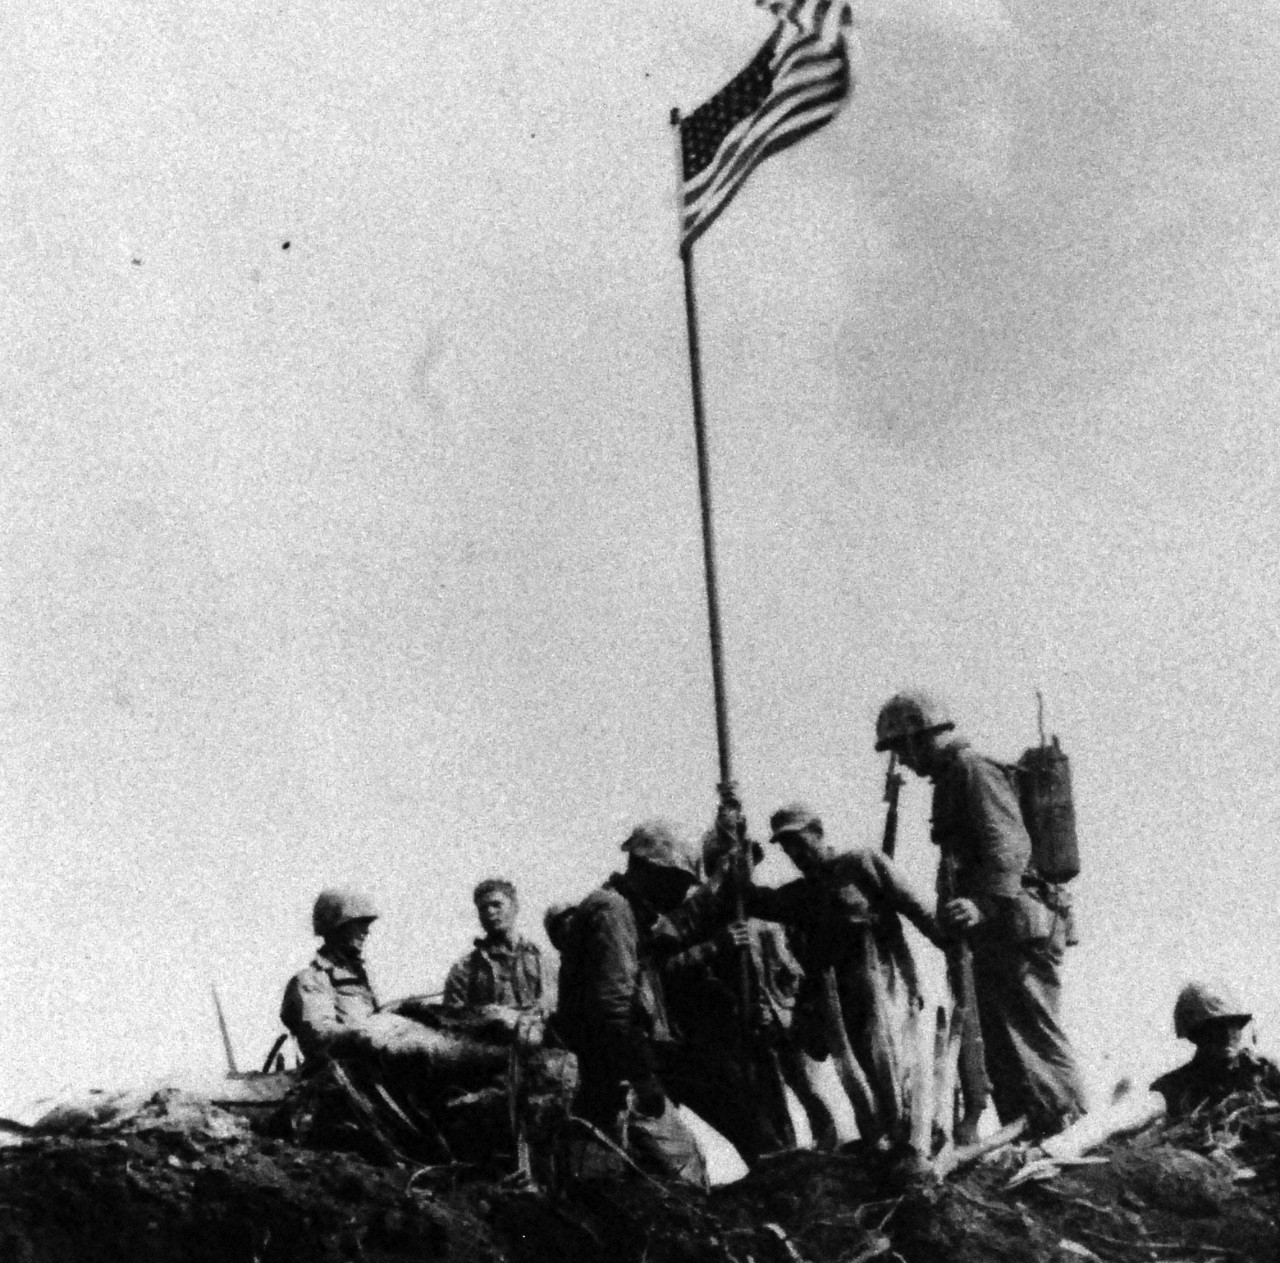 127-GW-319-A708068:   Iwo Jima Operations, February 1945.  U.S. Marines of First Lieutenant Harold G. Schrier’s patrol, Co. “E”, 2nd bn, 28th Marines, moments after raising the First Flag atop Mt. Suribachi.  Identifiable U.S. Marines are: Private First Class Gene M. Marshall, carrying radio and Sergeant Henry O. Hansen, immediately to the left of Private First Class, Marshall, wearing utility cover, with right hand on flag pole.   Photographed by Sergeant L.R. Lowery, February 23, 1945.   U.S. Marine Corps Photograph, now in the collections of the National Archives.   (2016/09/06).